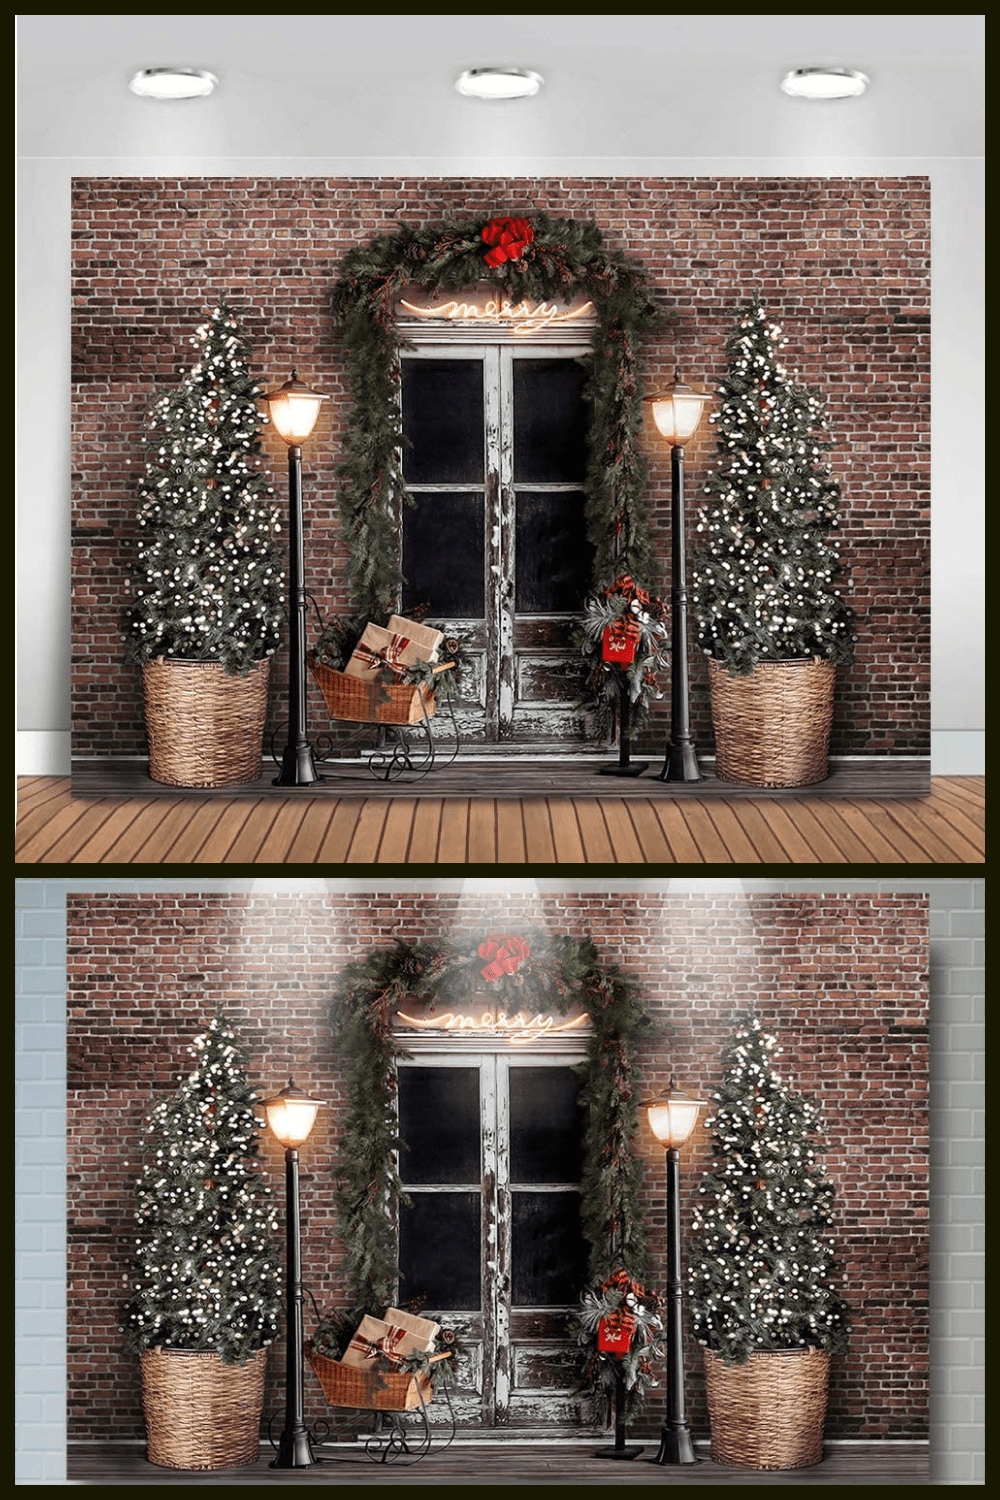 background for photo with brick wall, white window and Christmas trees.